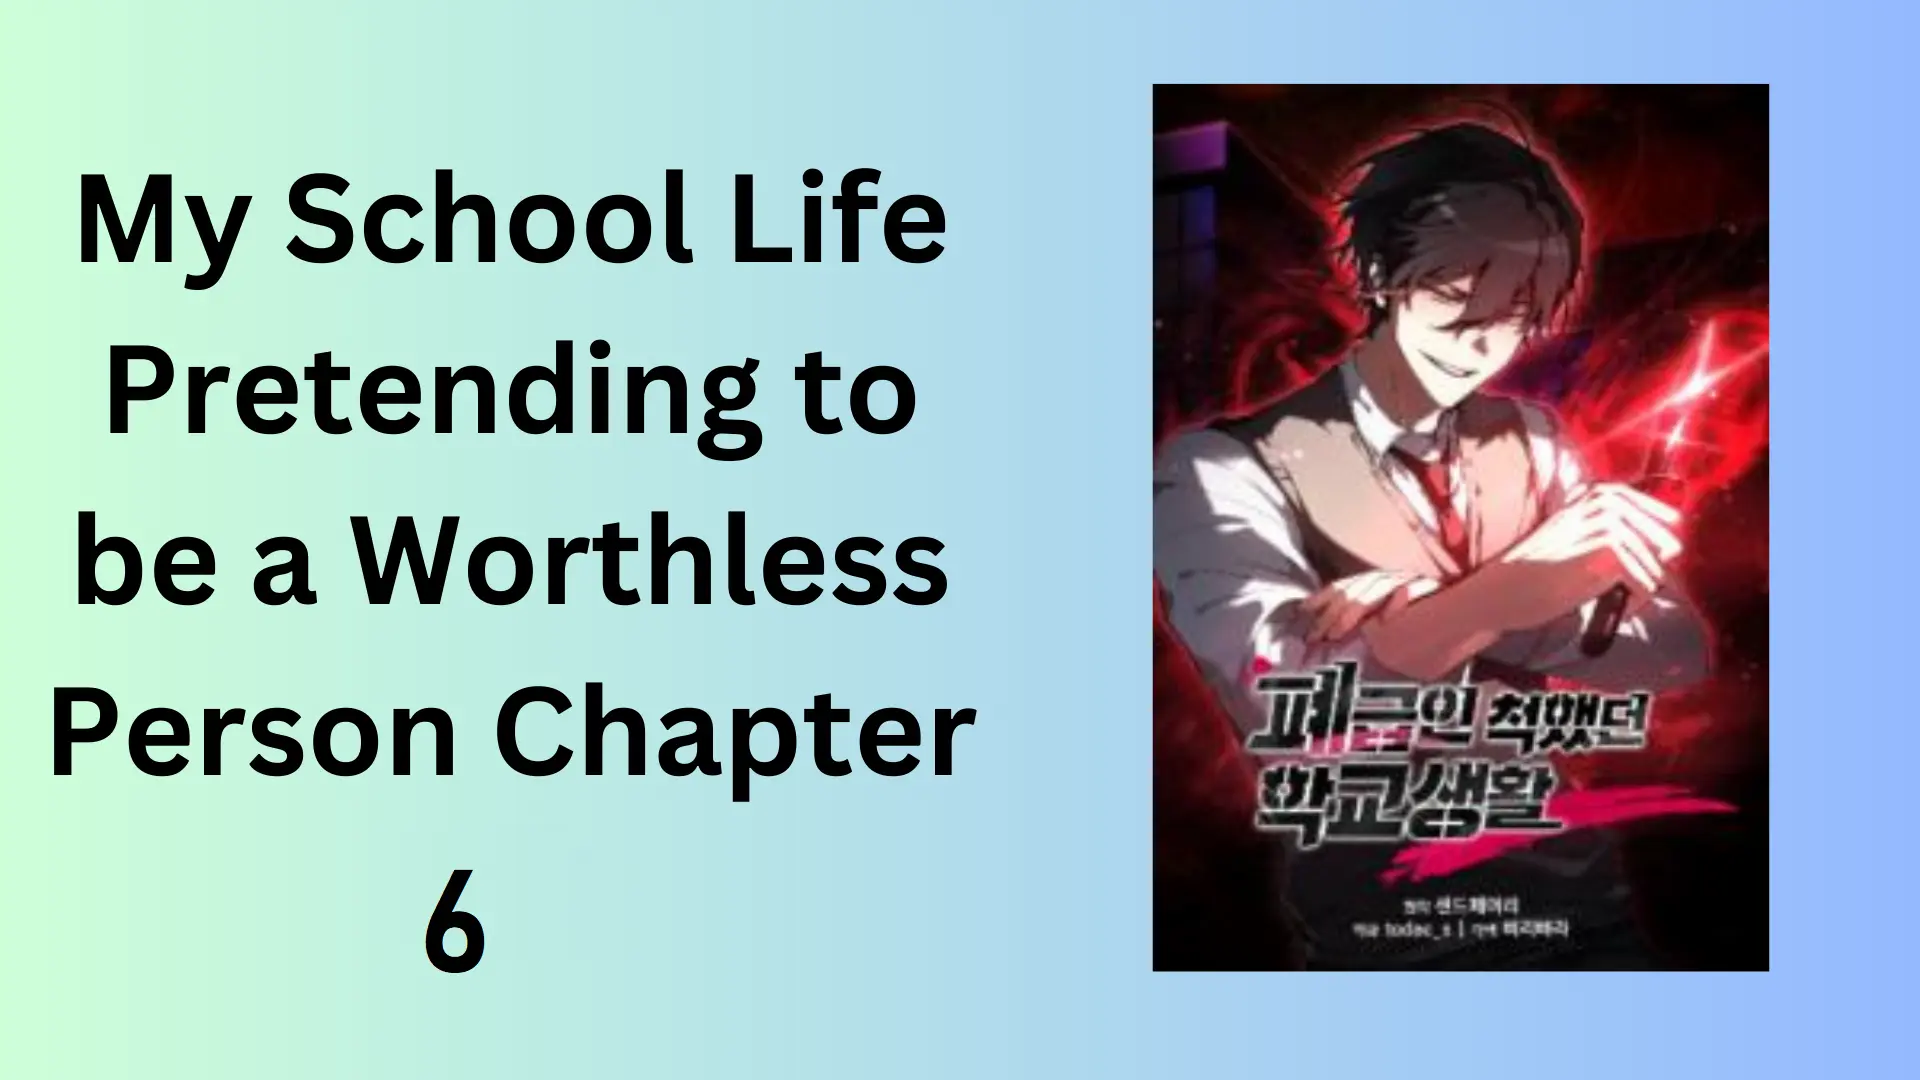 My School Life Pretending to be a Worthless Person Chapter 6 -001